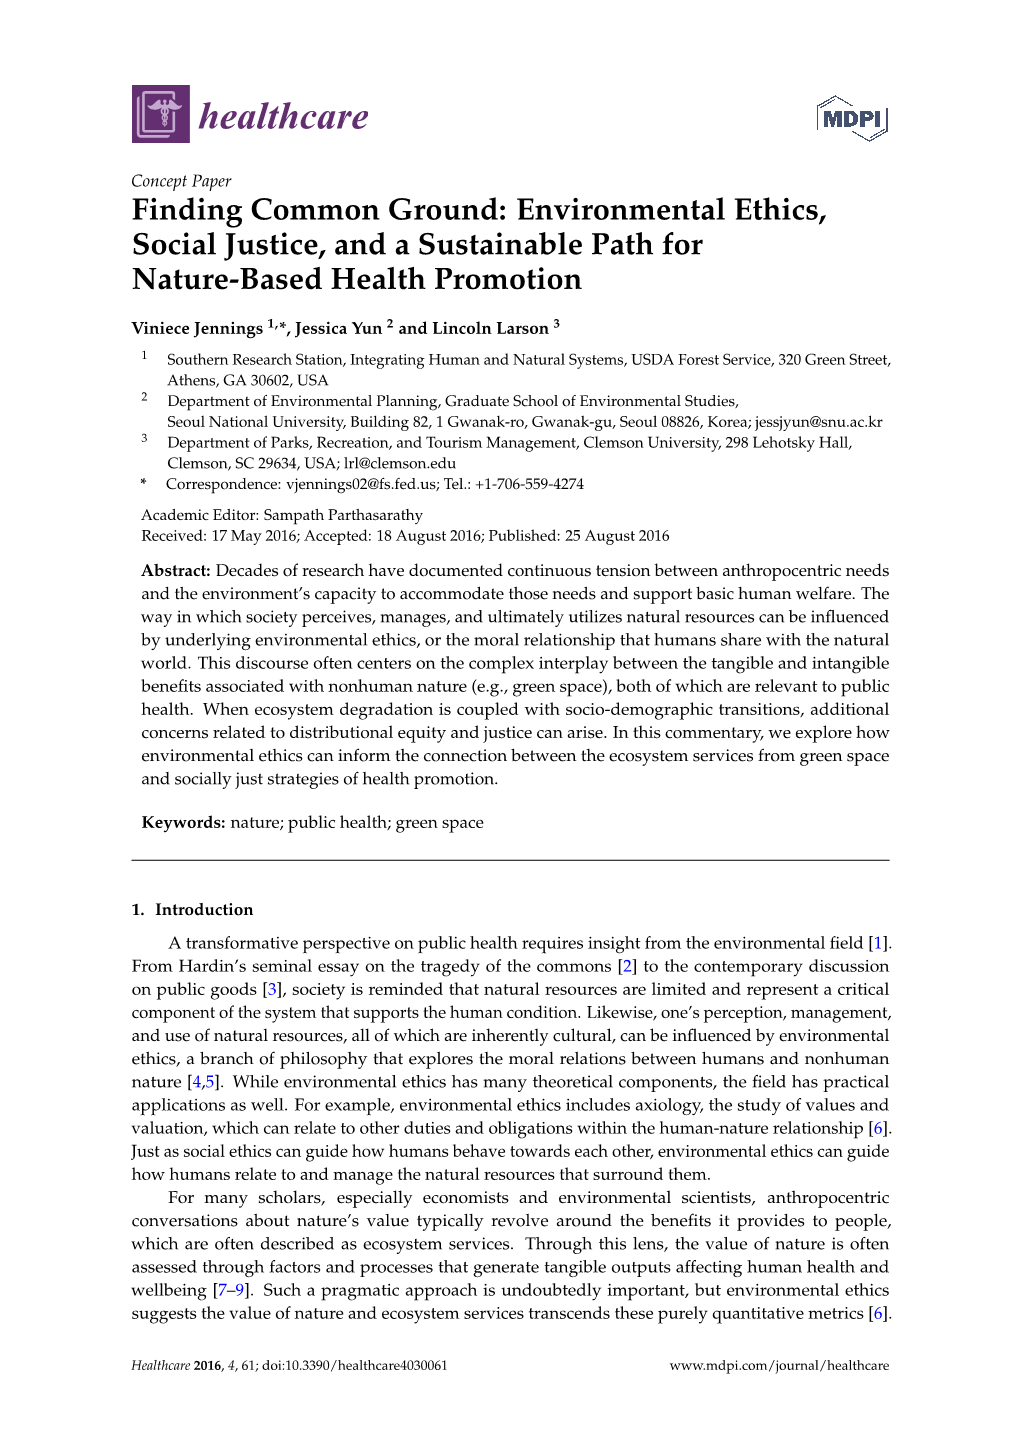 Environmental Ethics, Social Justice, and a Sustainable Path for Nature-Based Health Promotion